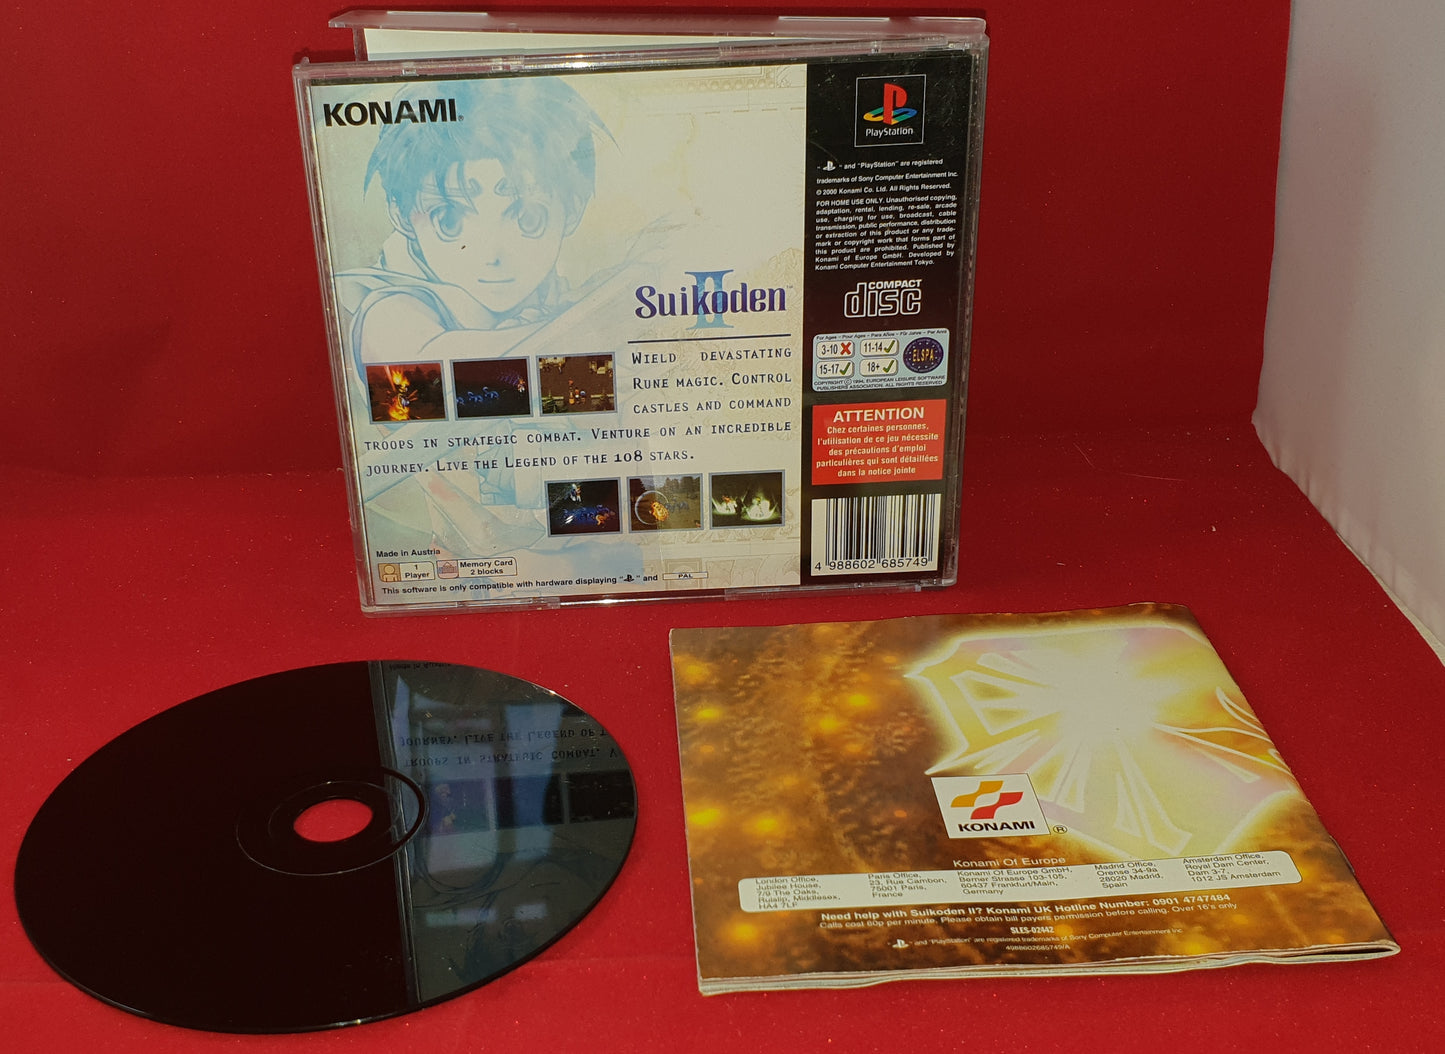 Suikoden II Sony Playstation 1 (PS1) RARE Game